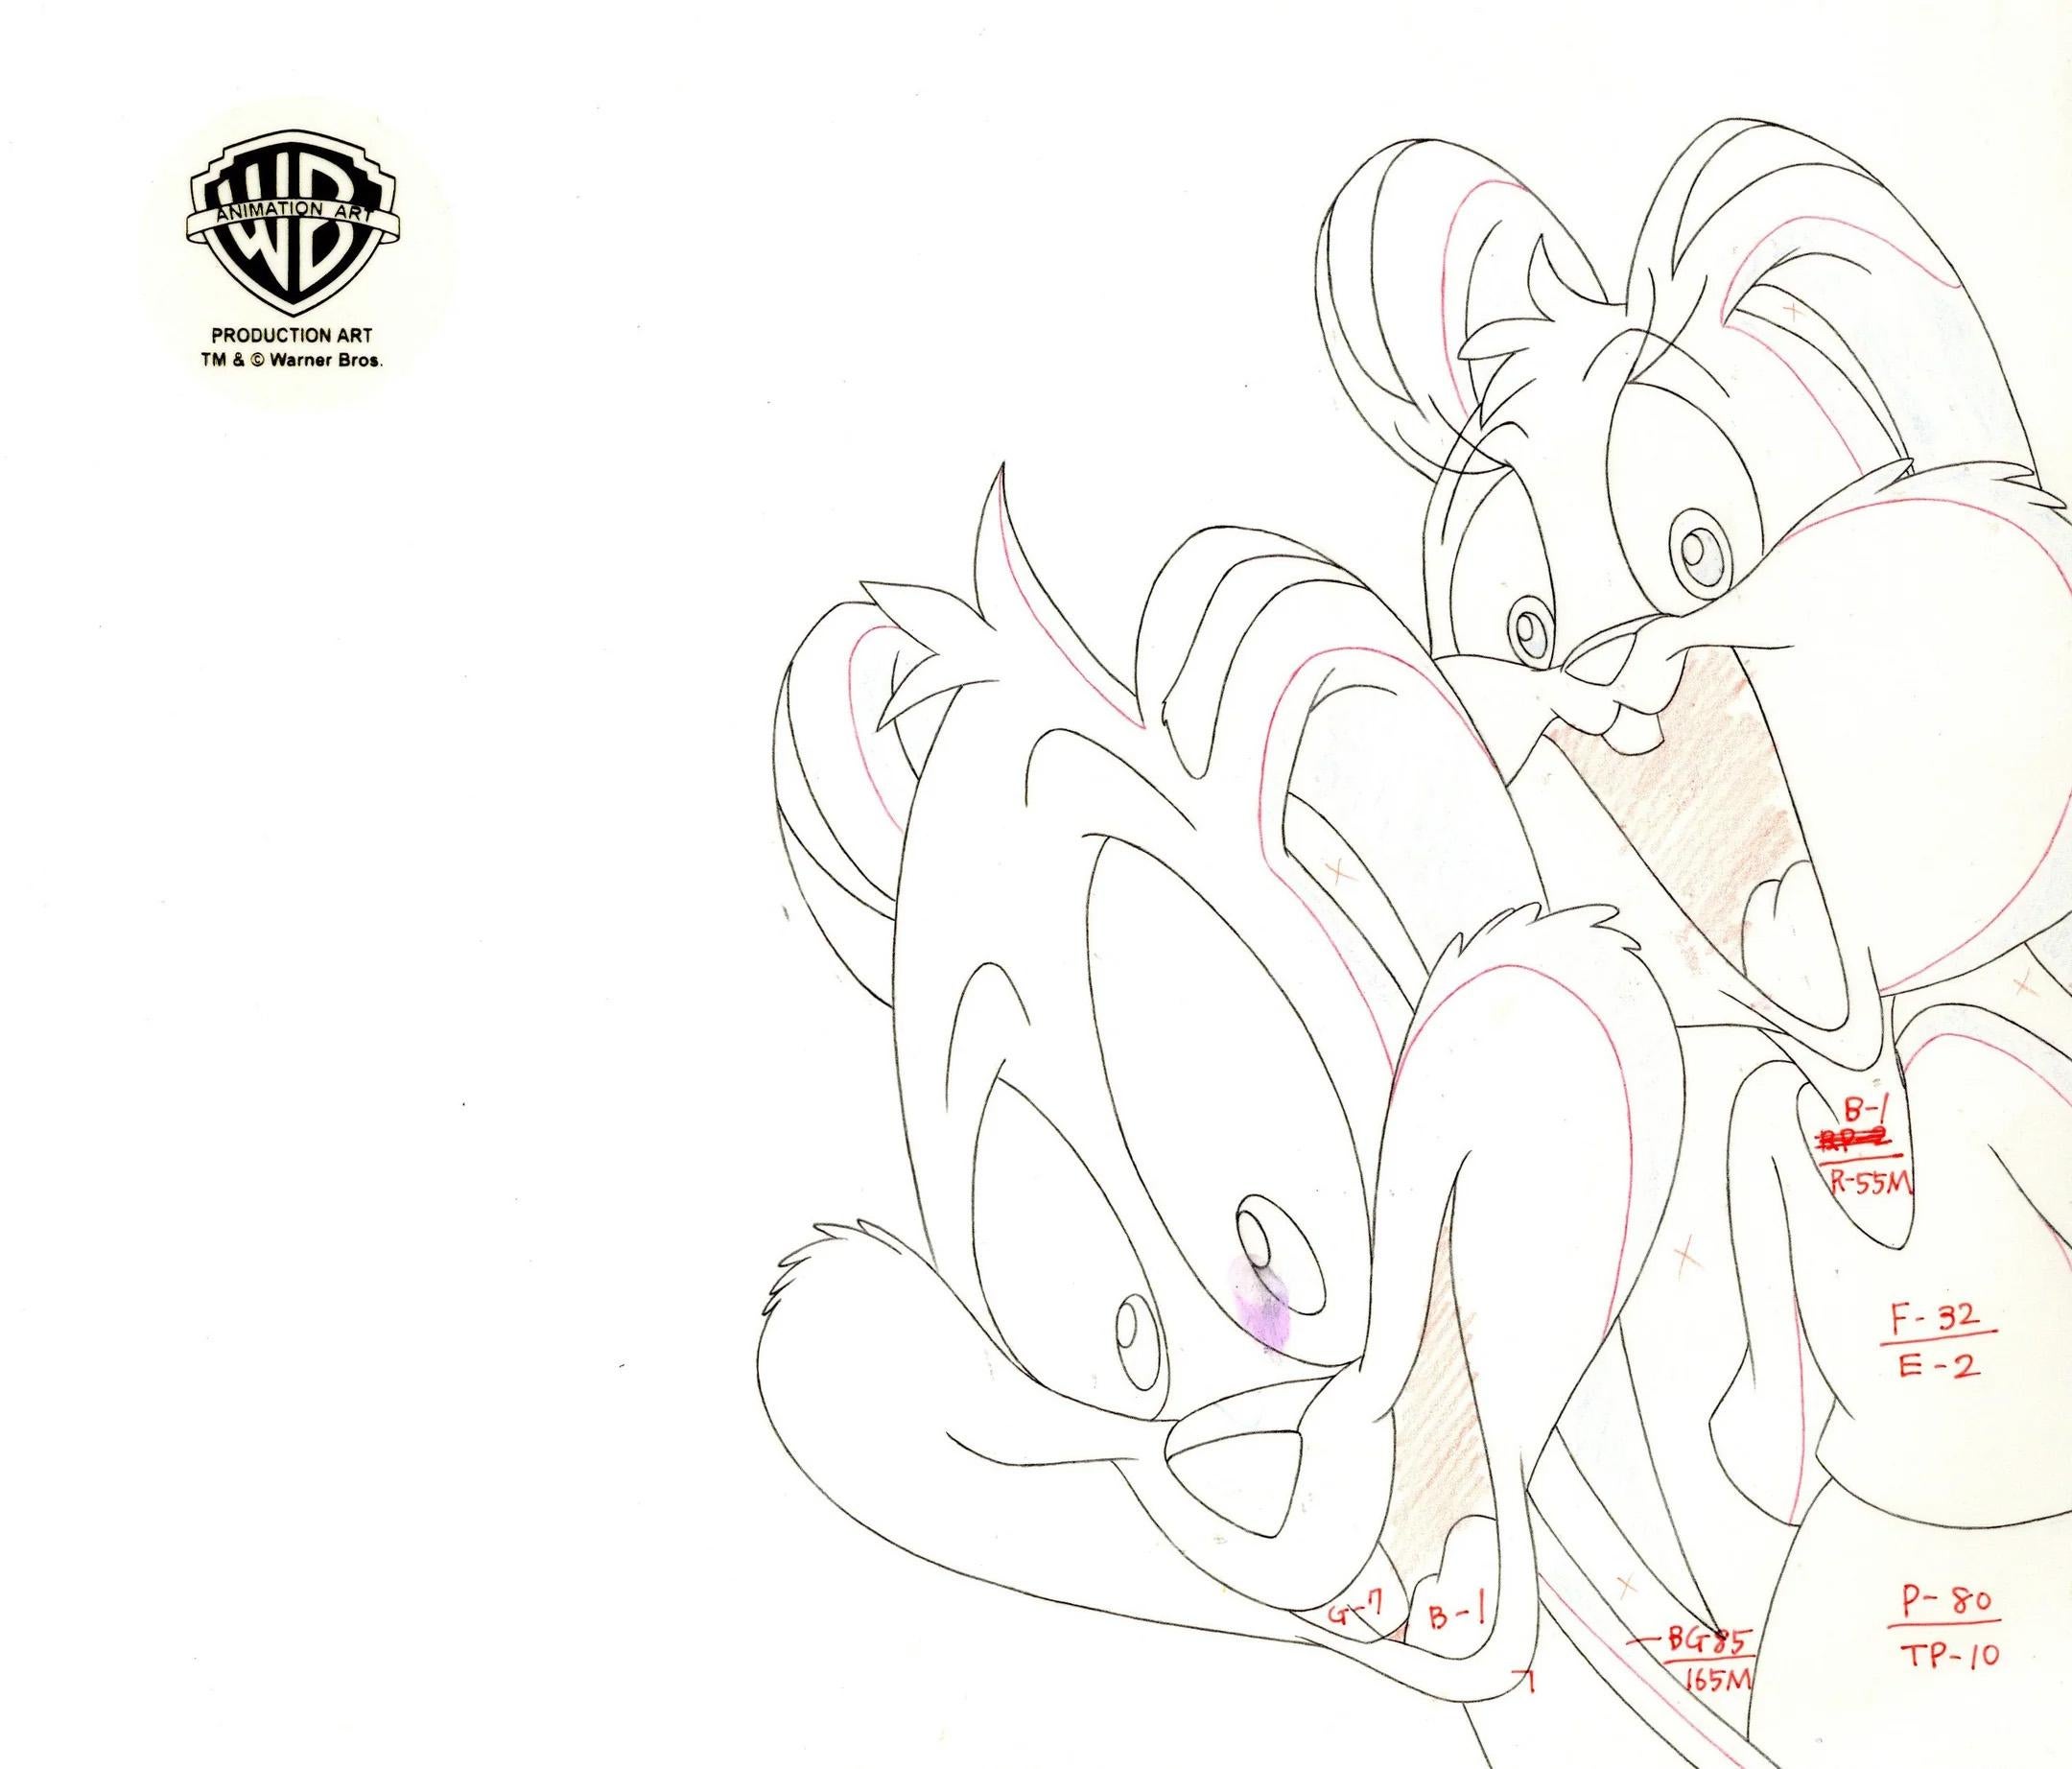 Tiny Toons Original Production Drawing: Buster and Babs Bunny - Art by Warner Bros. Studio Artists